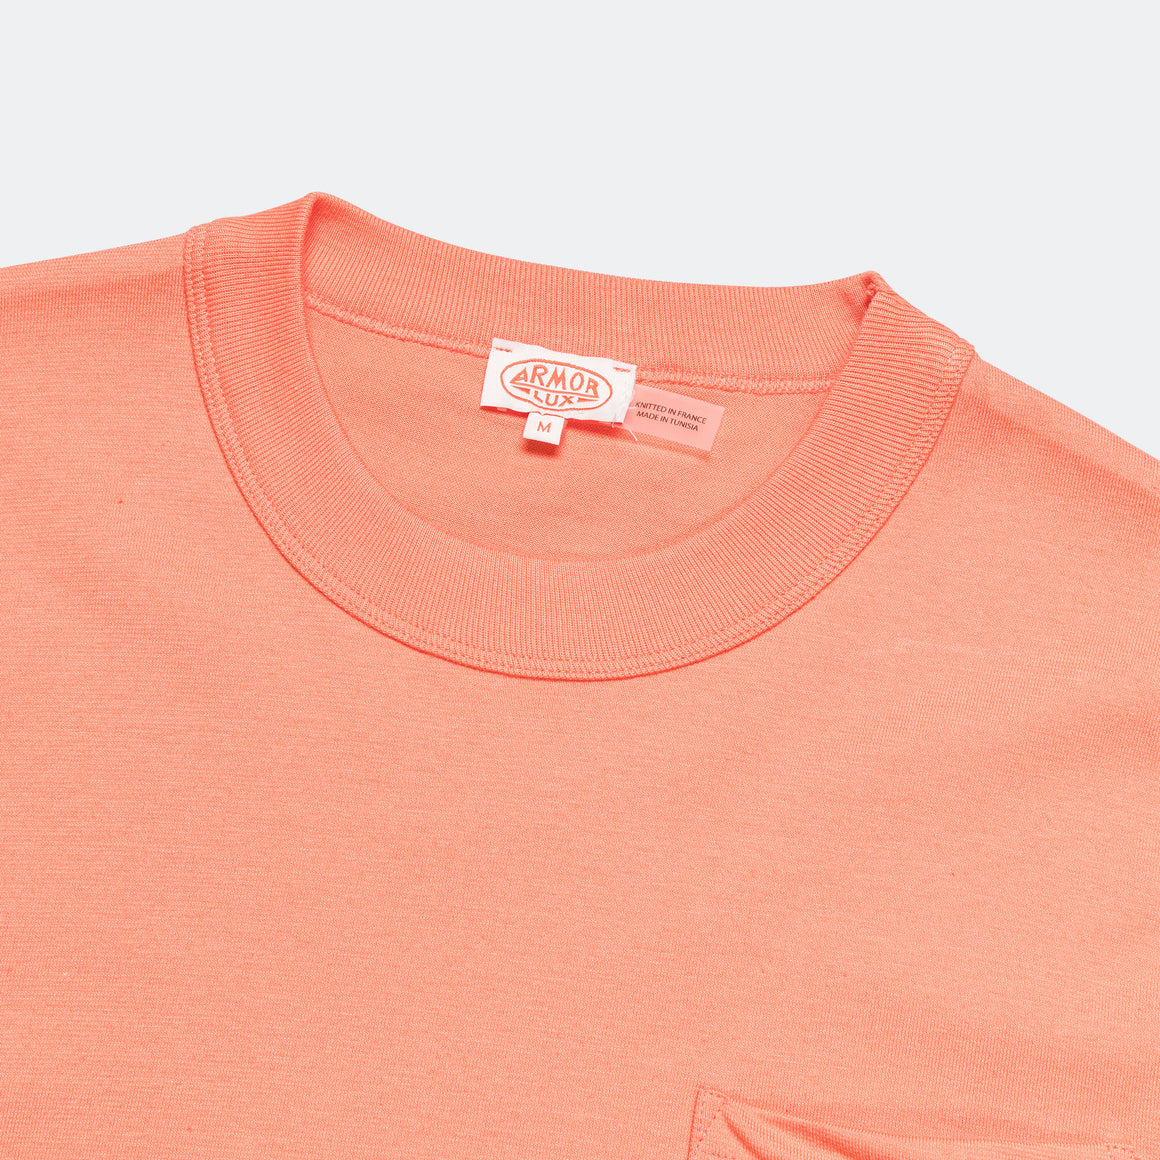 Armor Lux - Heritage Pocket T-Shirt - Coral - UP THERE